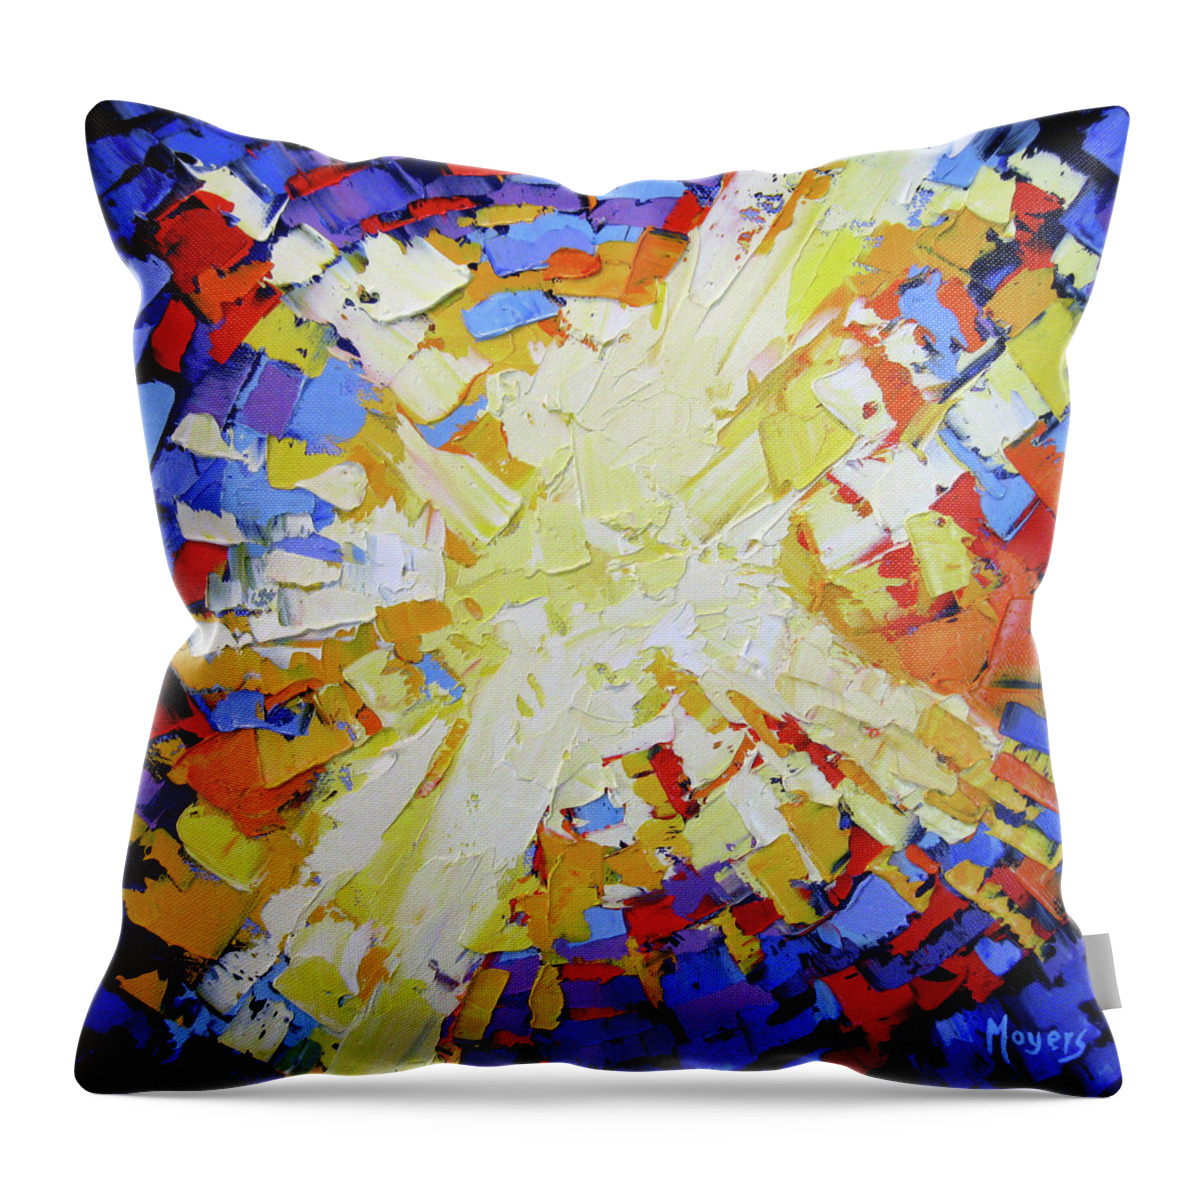 Mike Throw Pillow featuring the painting Awake My Soul by Mike Moyers